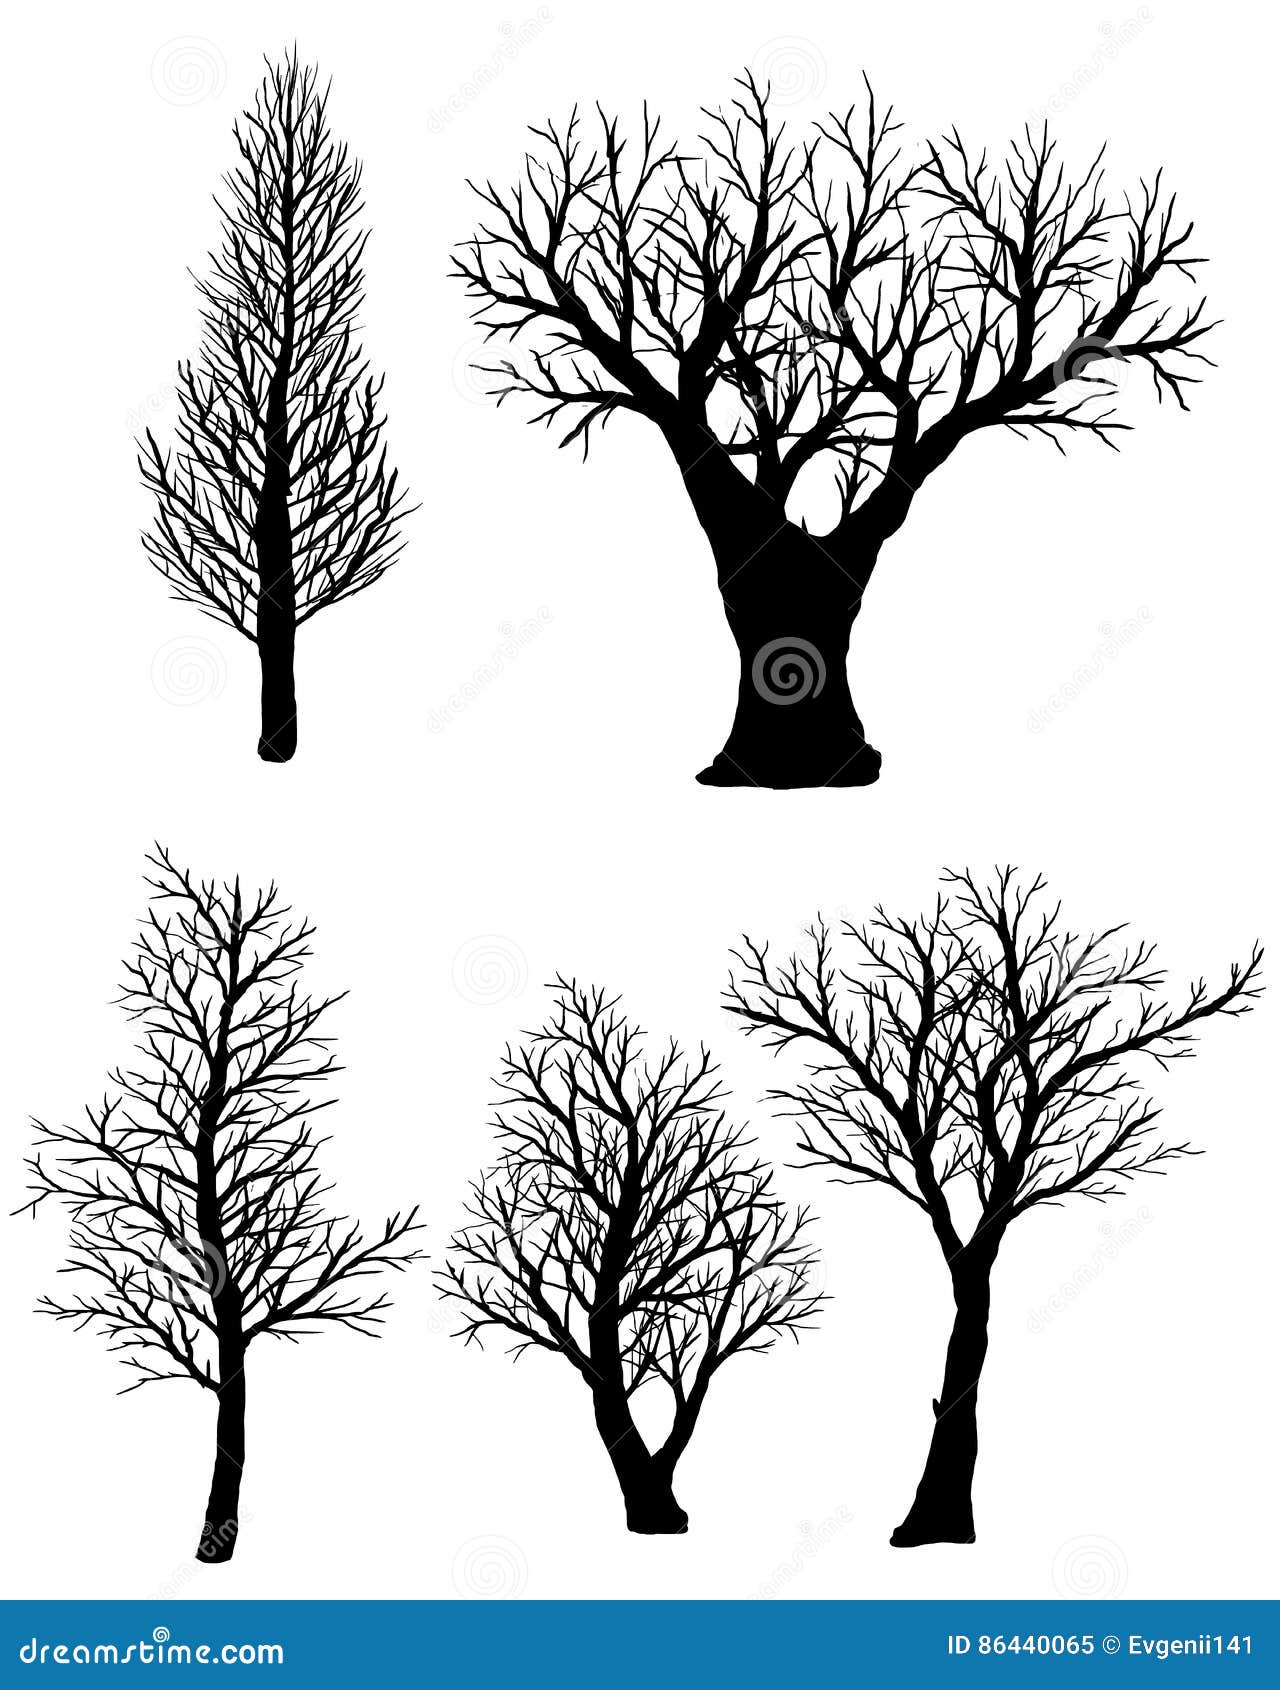 Set of Silhouettes of Bare Trees on a White Background. Stock Vector